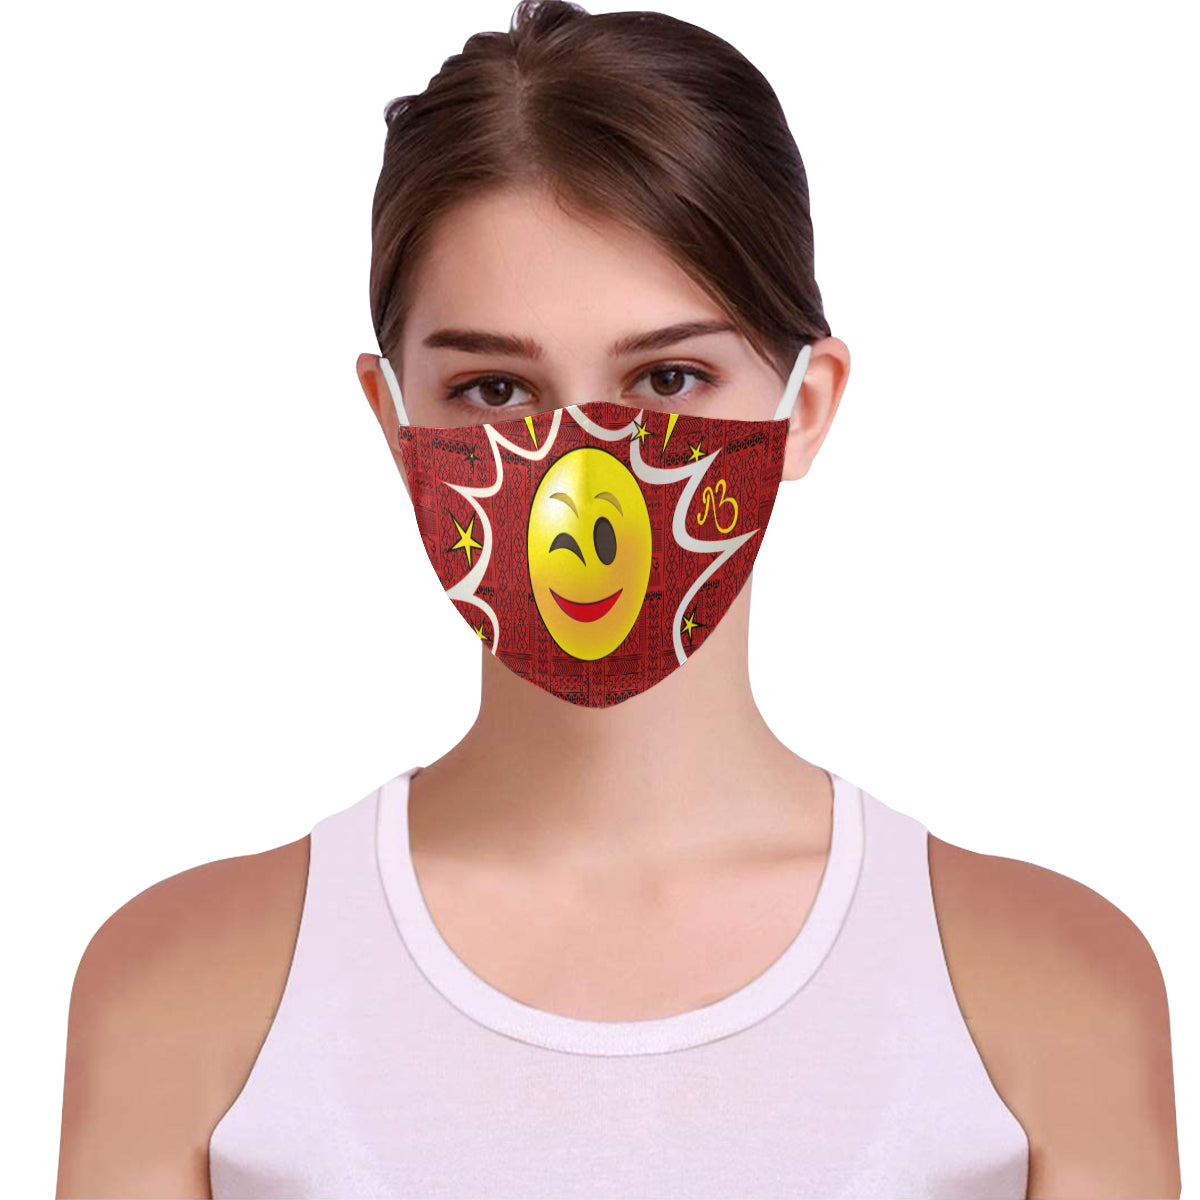 Wink Tribal Print Comic Emoji Cotton Fabric Face Mask with Filter Slot and Adjustable Strap - Non-medical use (2 Filters Included)